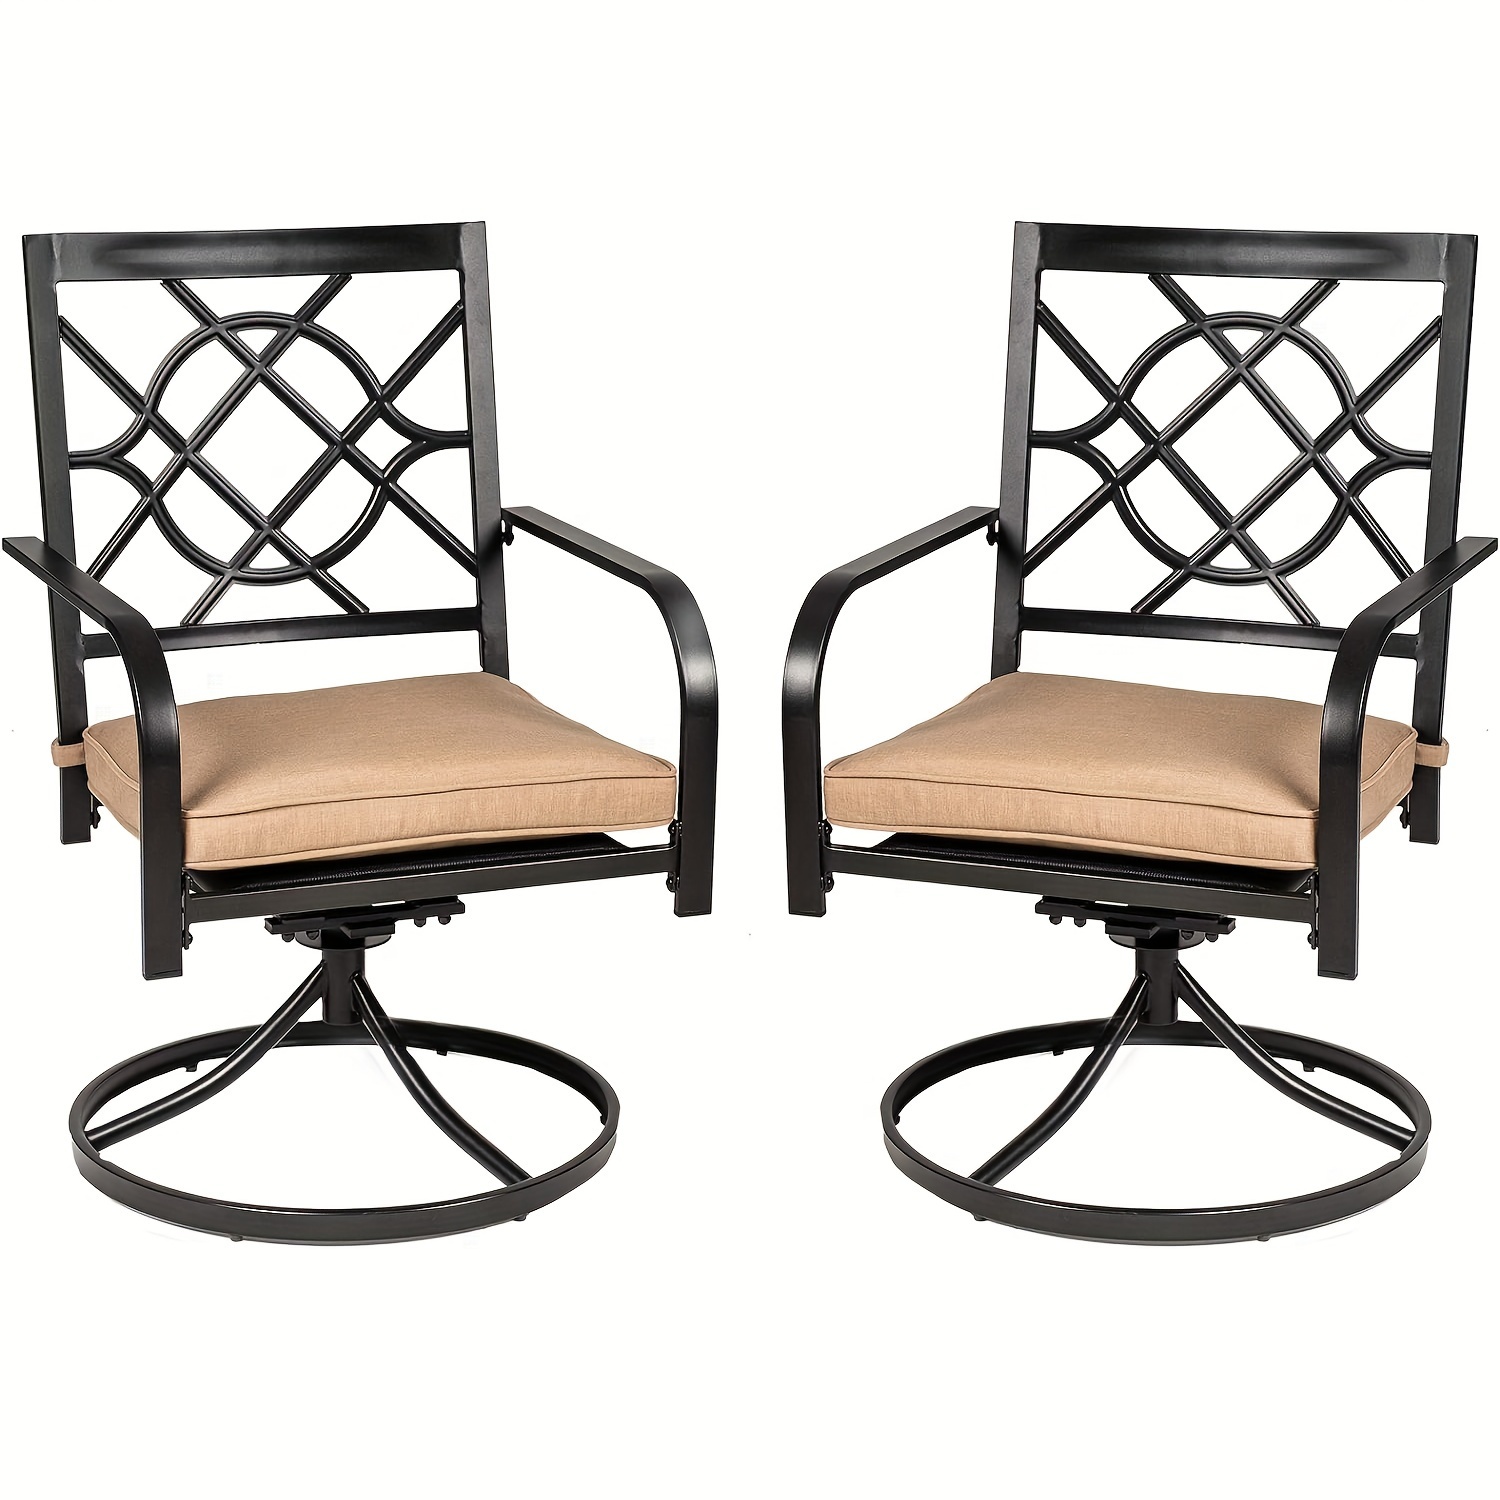 

Outdoor Dining Set Of 2, Metal Frame Patio Chair Rocker With Brown Cushion For Garden, Bistro, Backyard, Balcony